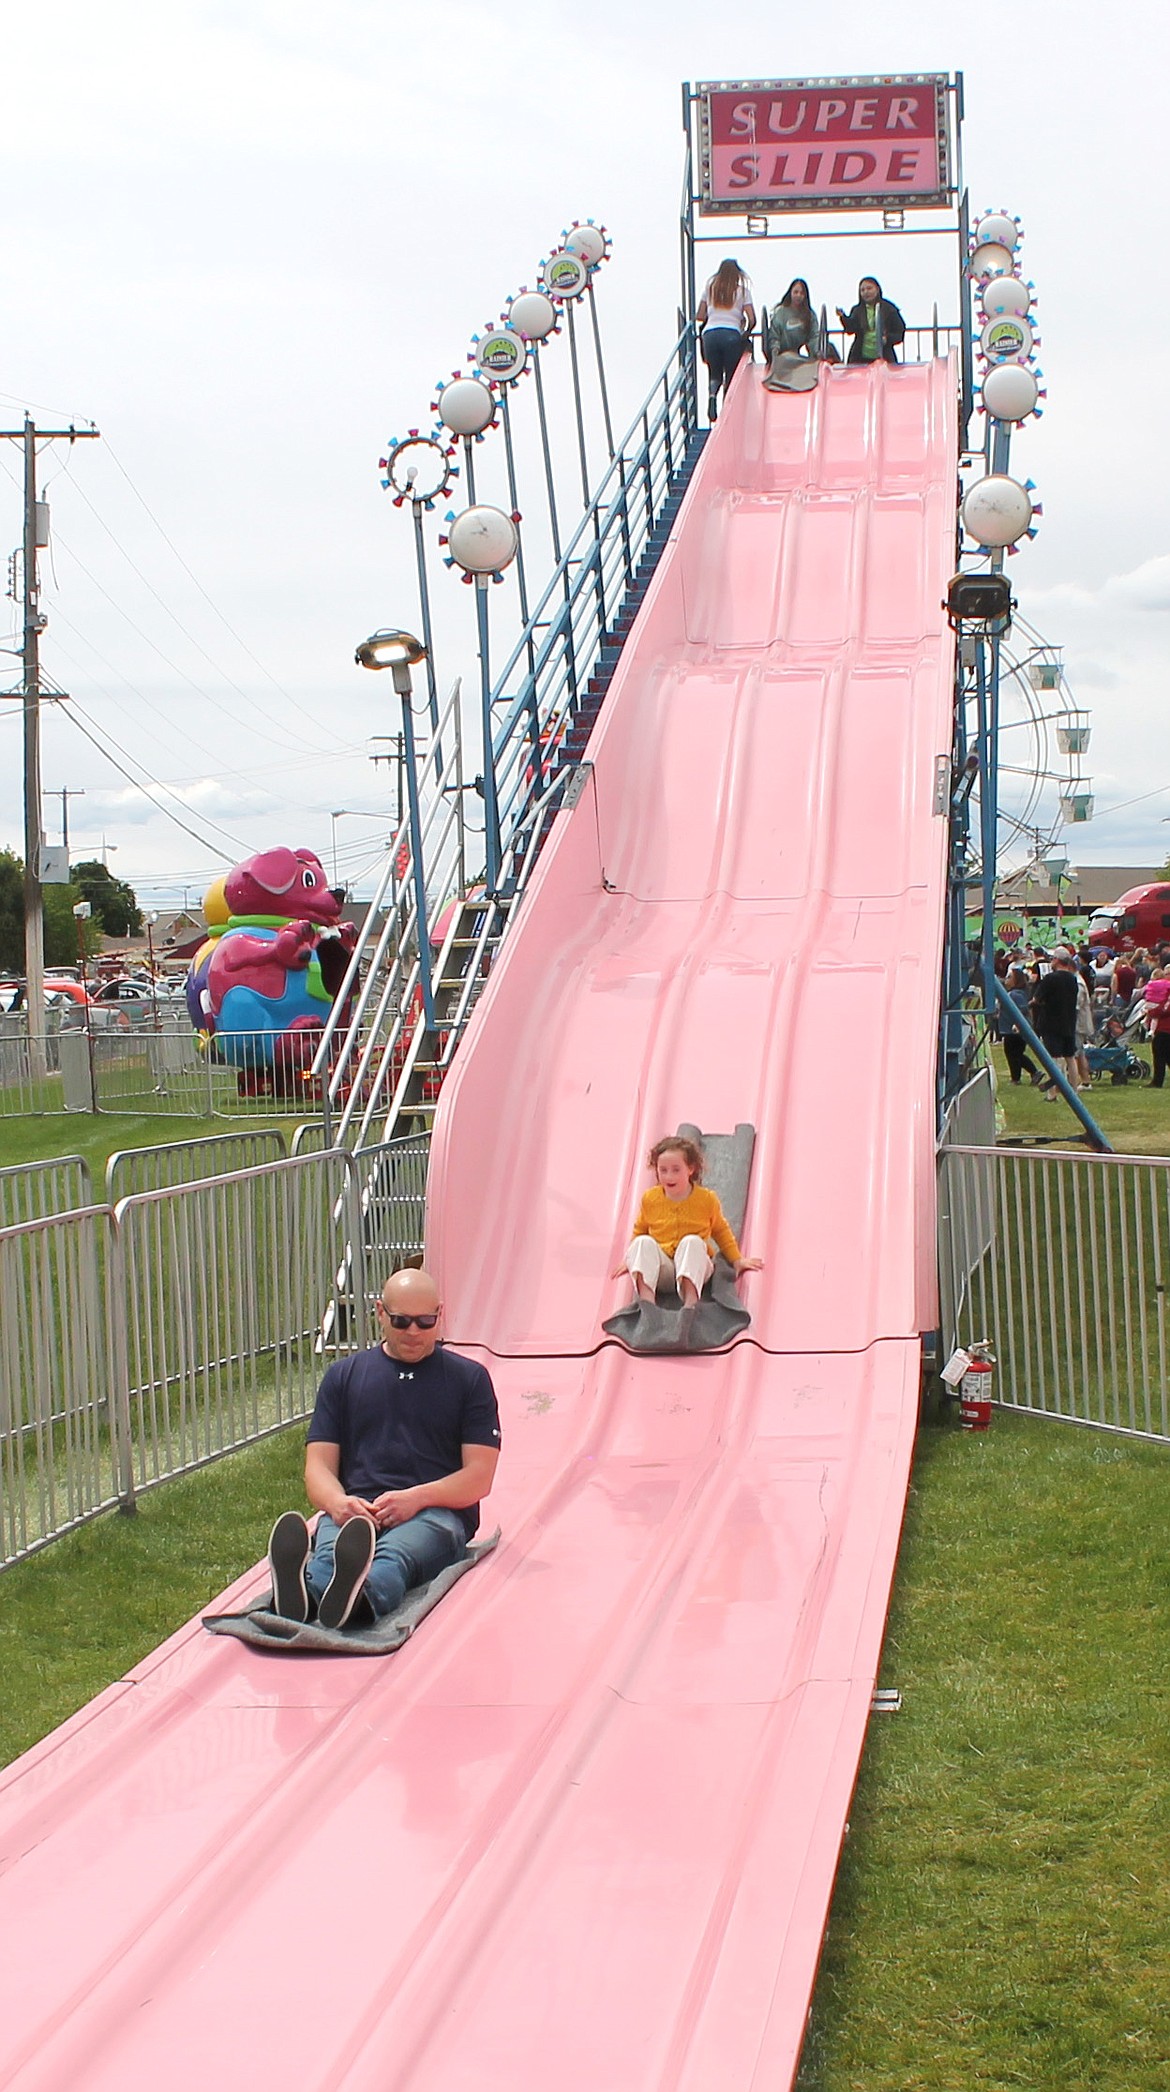 The Super Slide attracted riders at the 2022 Spring Festival in Moses Lake.